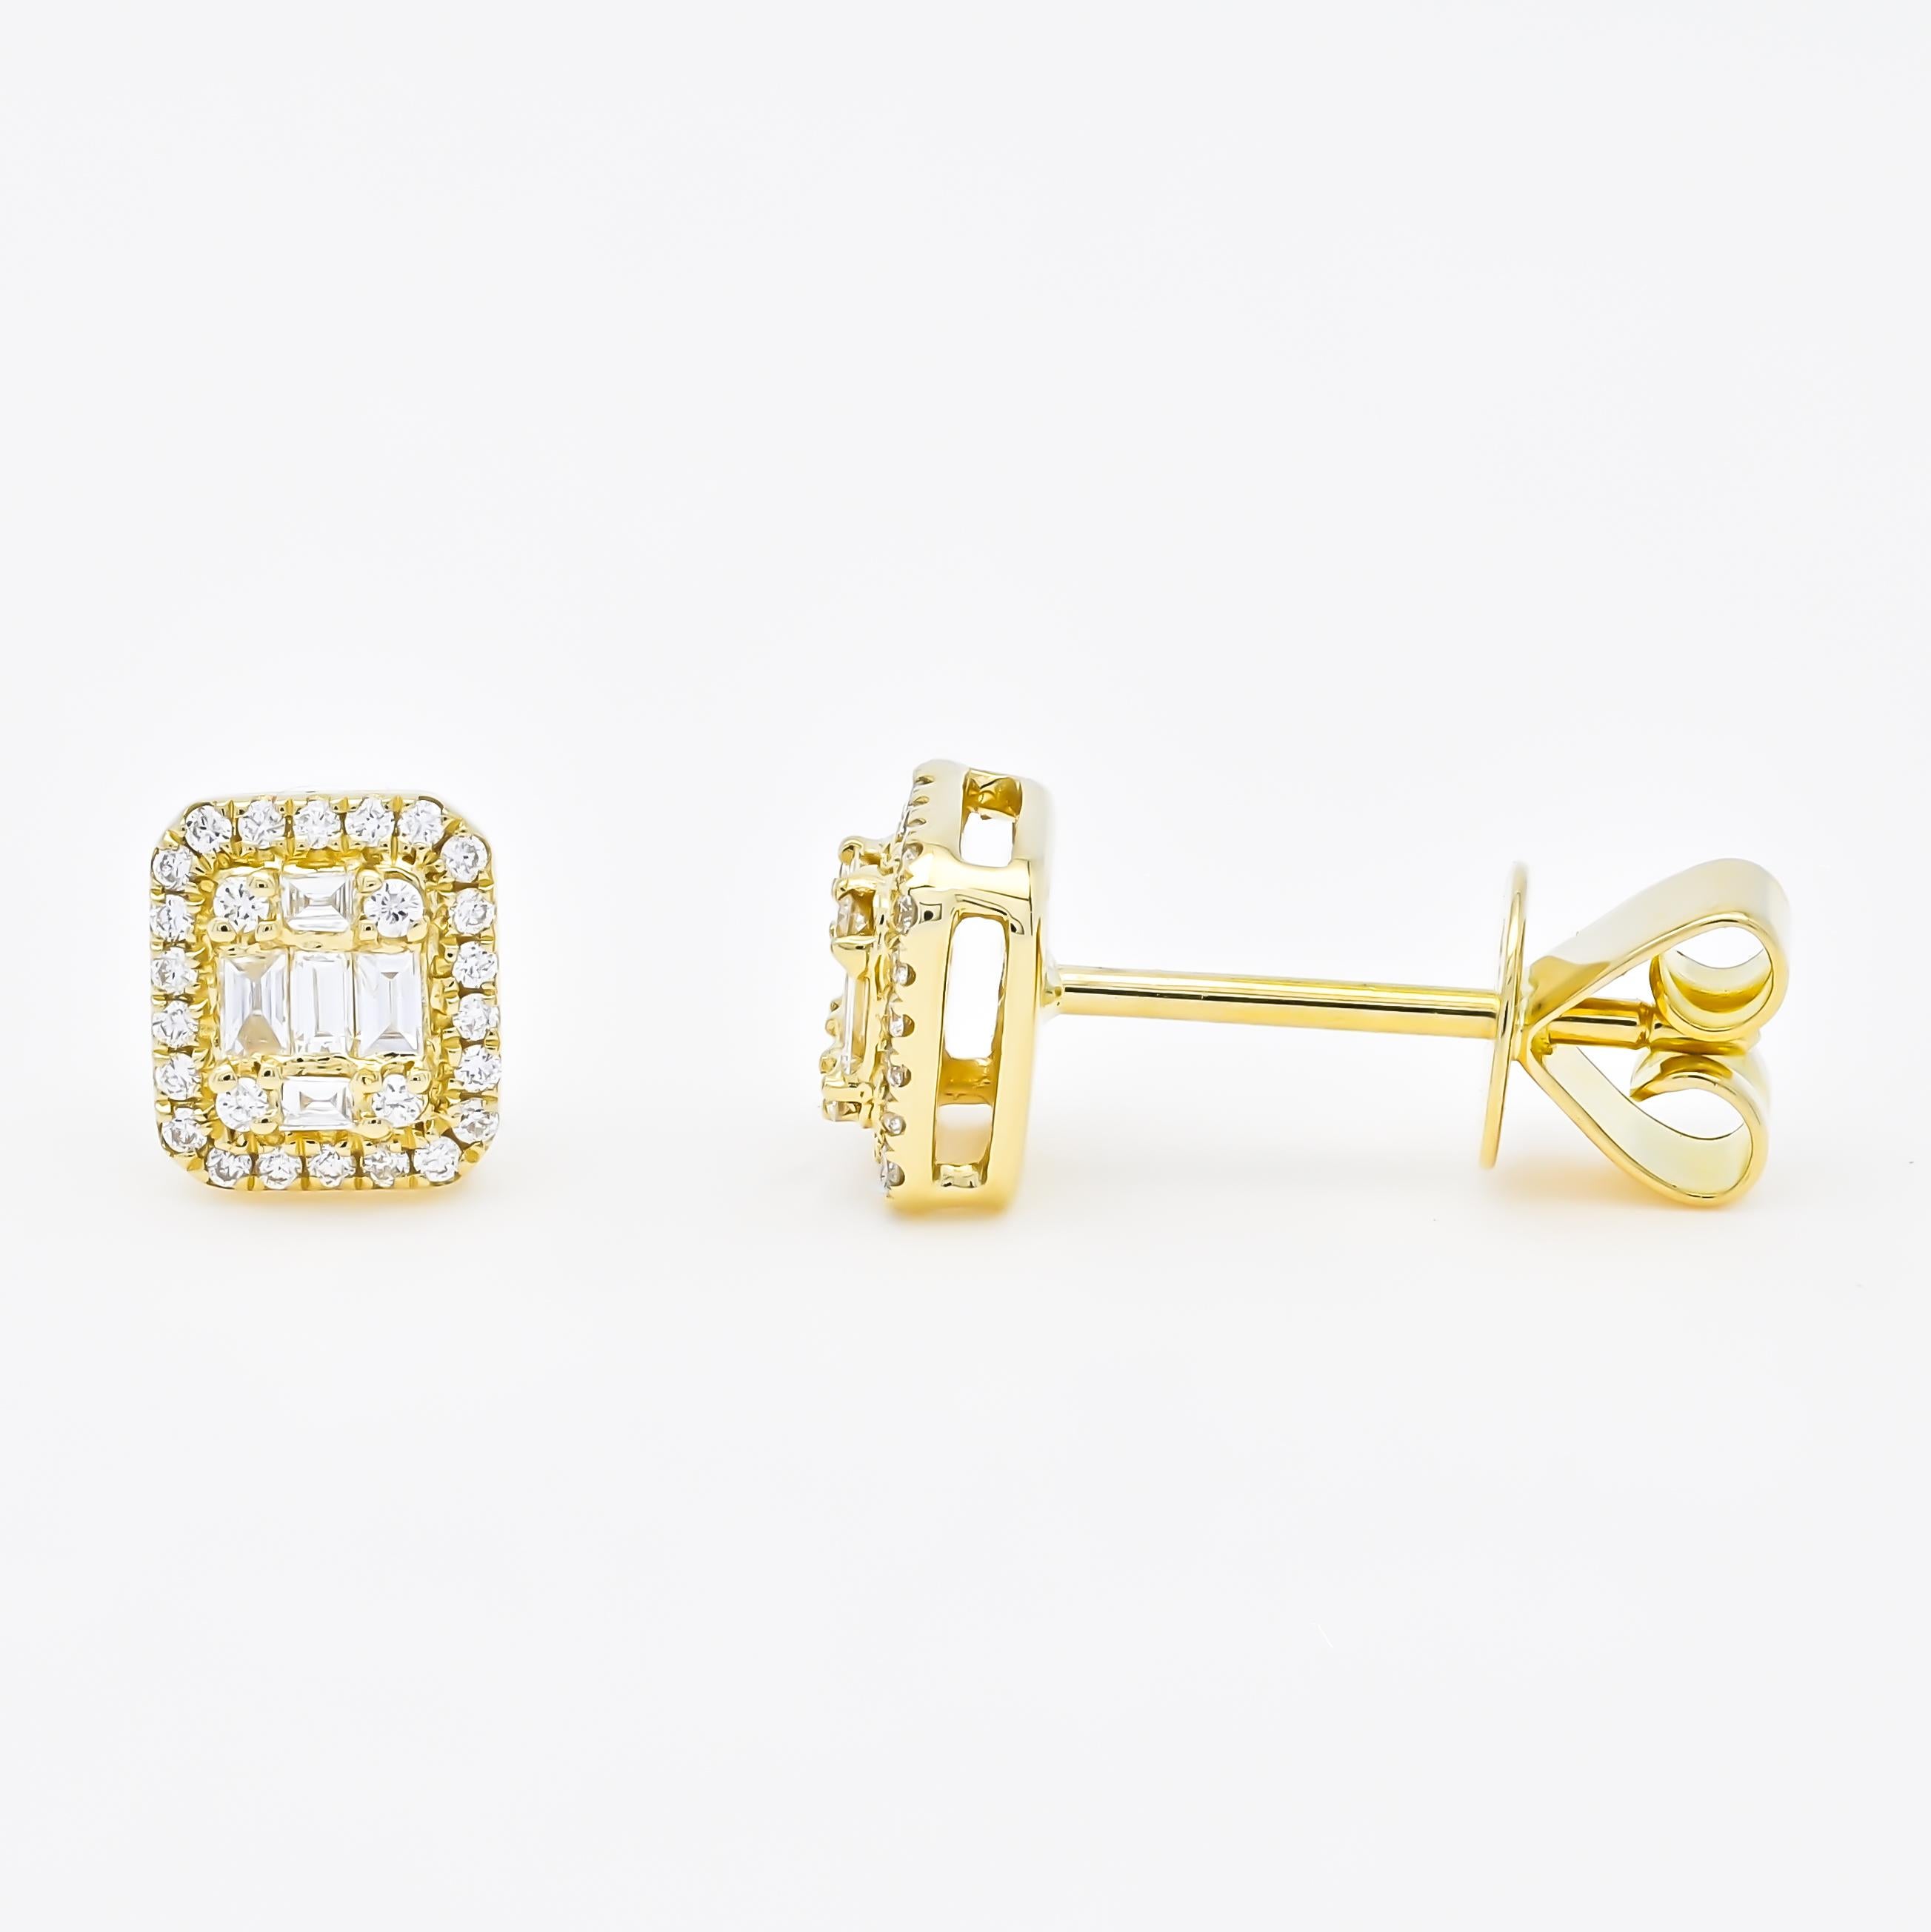 The beauty of these earrings lies in their simplicity. The round and baguette diamonds come together in a graceful cluster, creating a stunning display of brilliance. The combination of different diamond shapes adds dimension and visual interest to